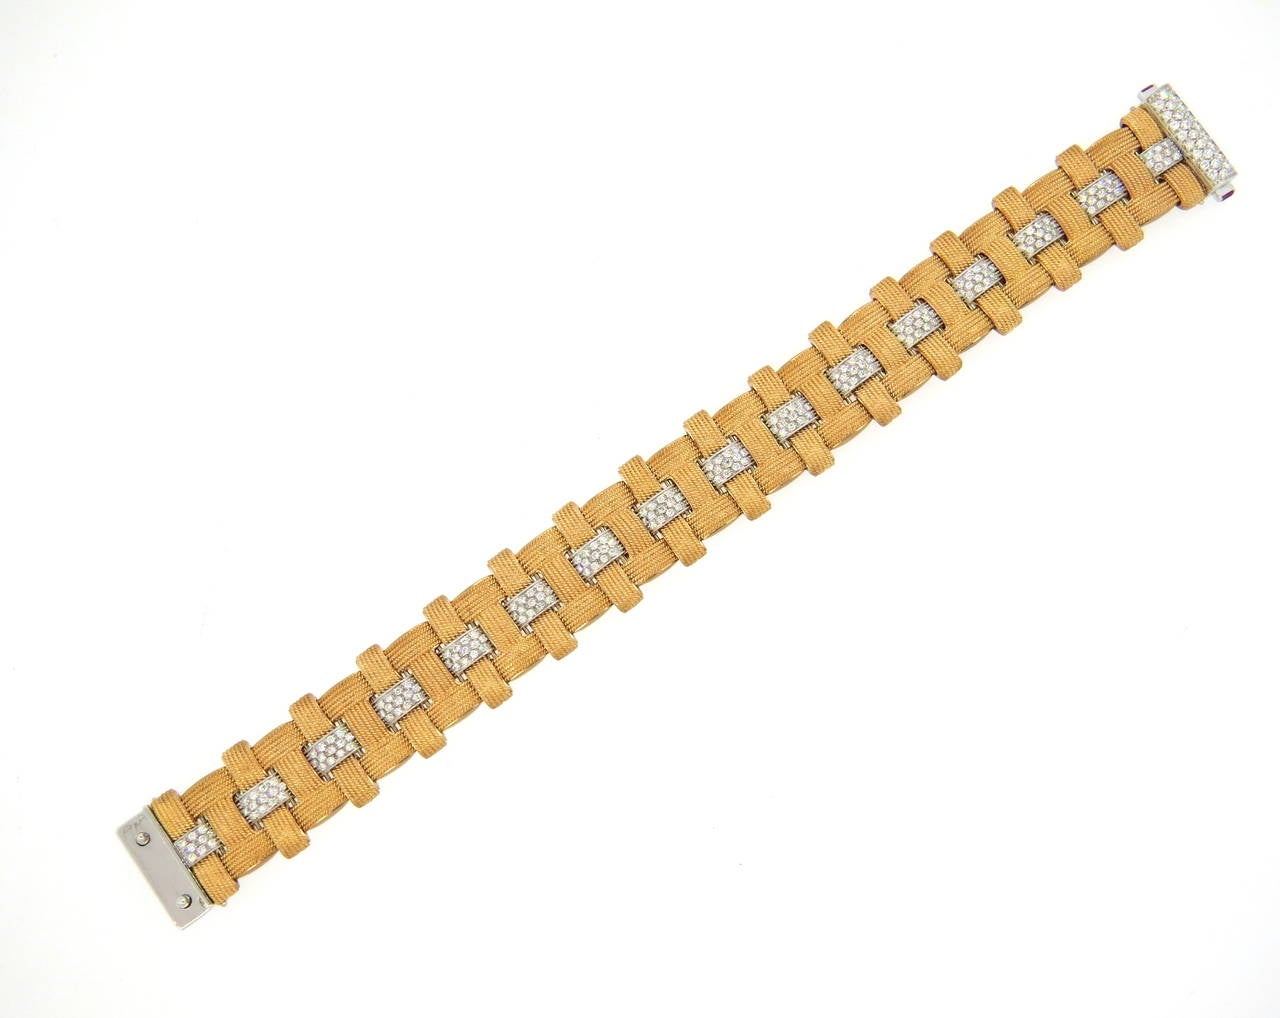 Impressive 18k rose gold bracelet, crafted by Roberto Coin for Magnifica collection, decorated with approximately 2.26ctw in G/Vs diamonds. Bracelet is 8 1/2